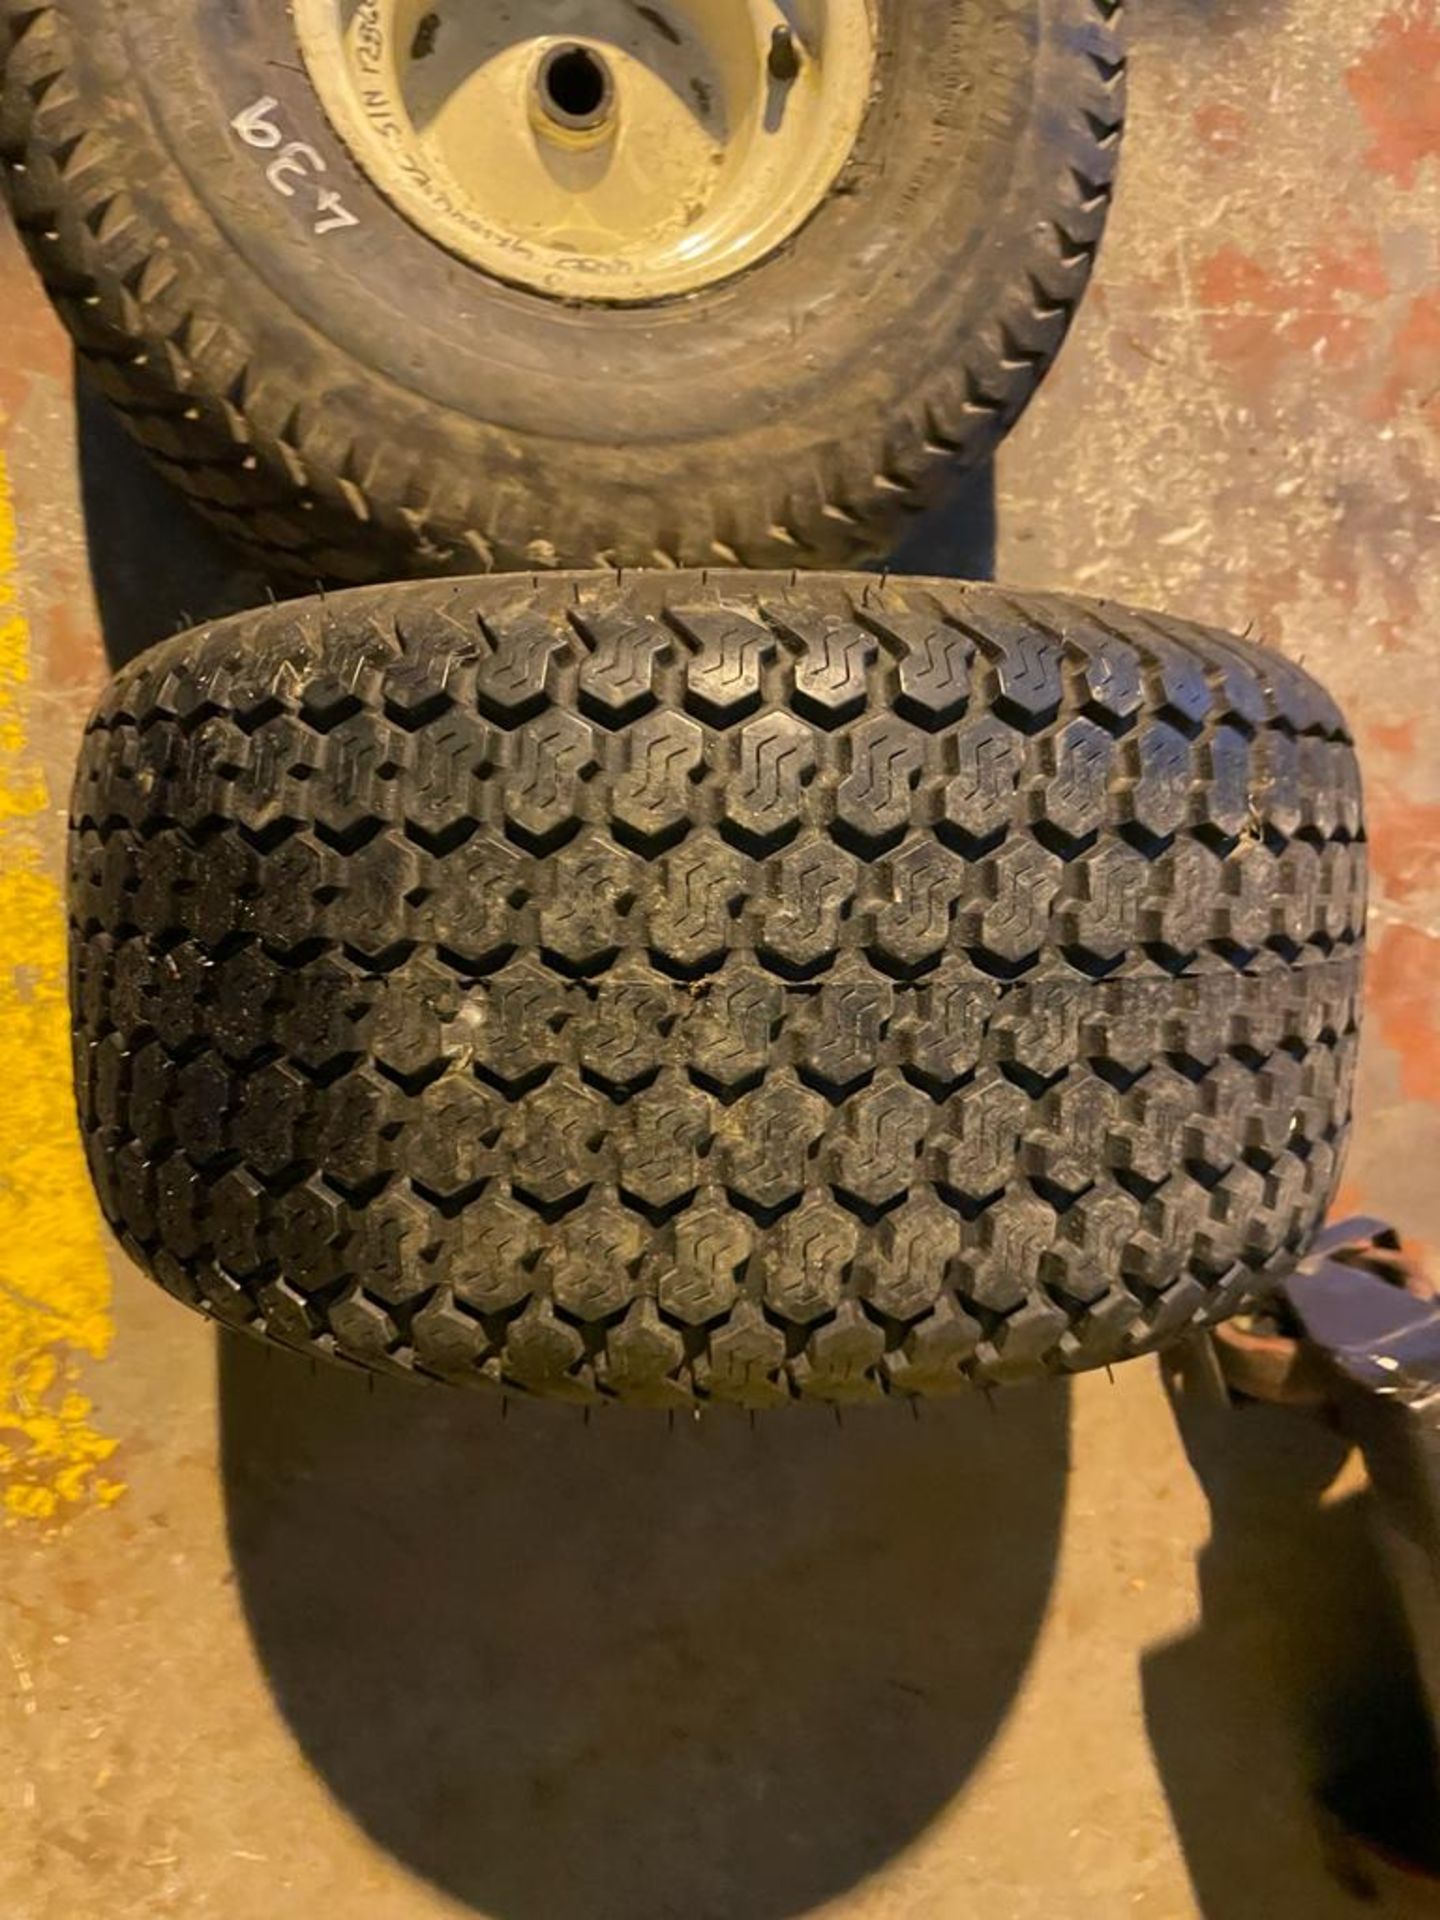 2 number quad bike trailer wheels and tyres - Image 2 of 3